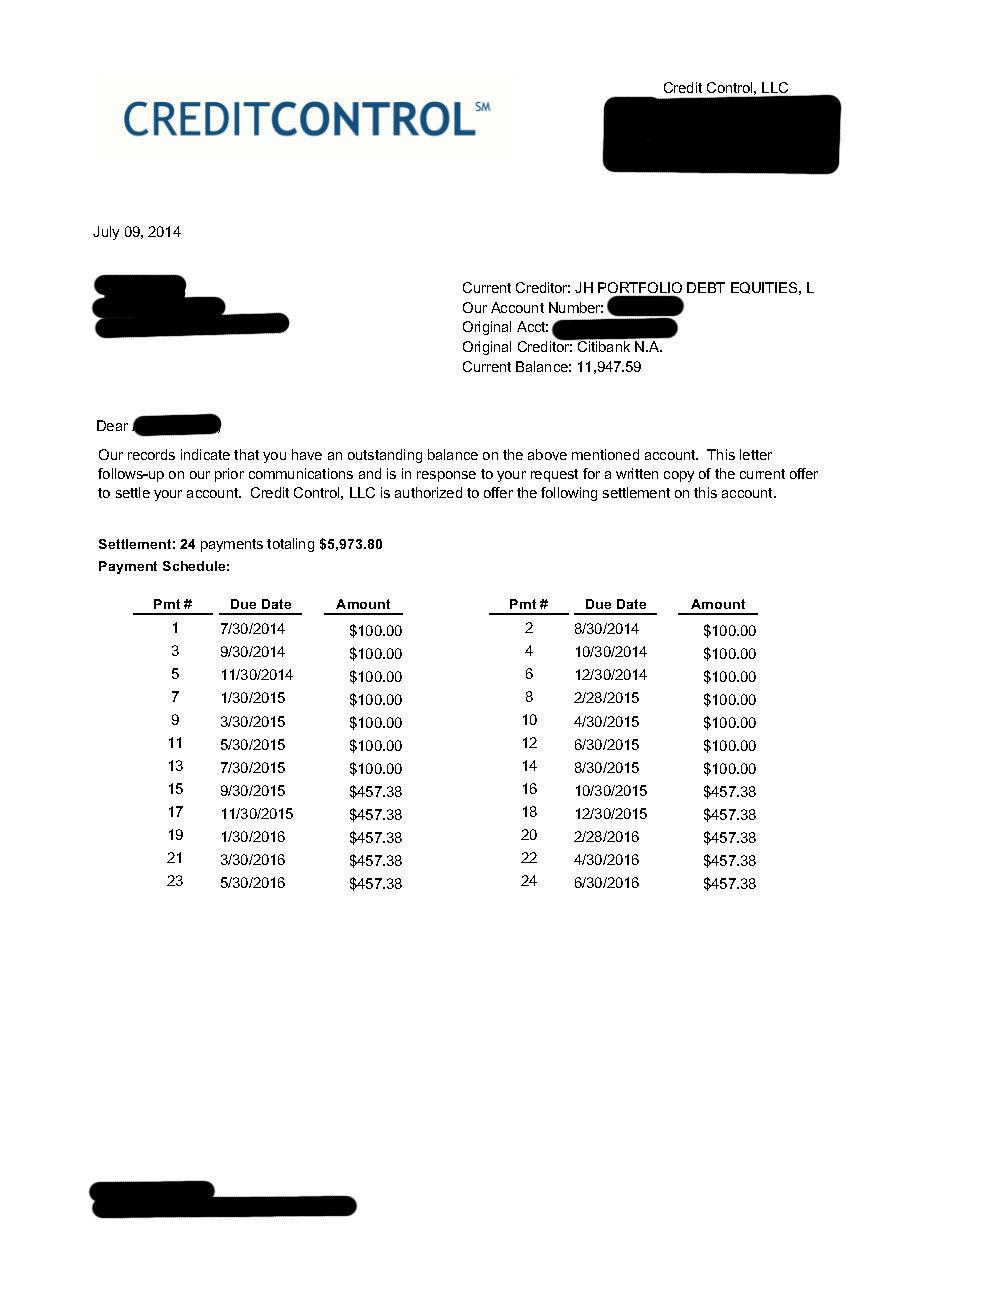 Client AC3 from NJ saved $47,629